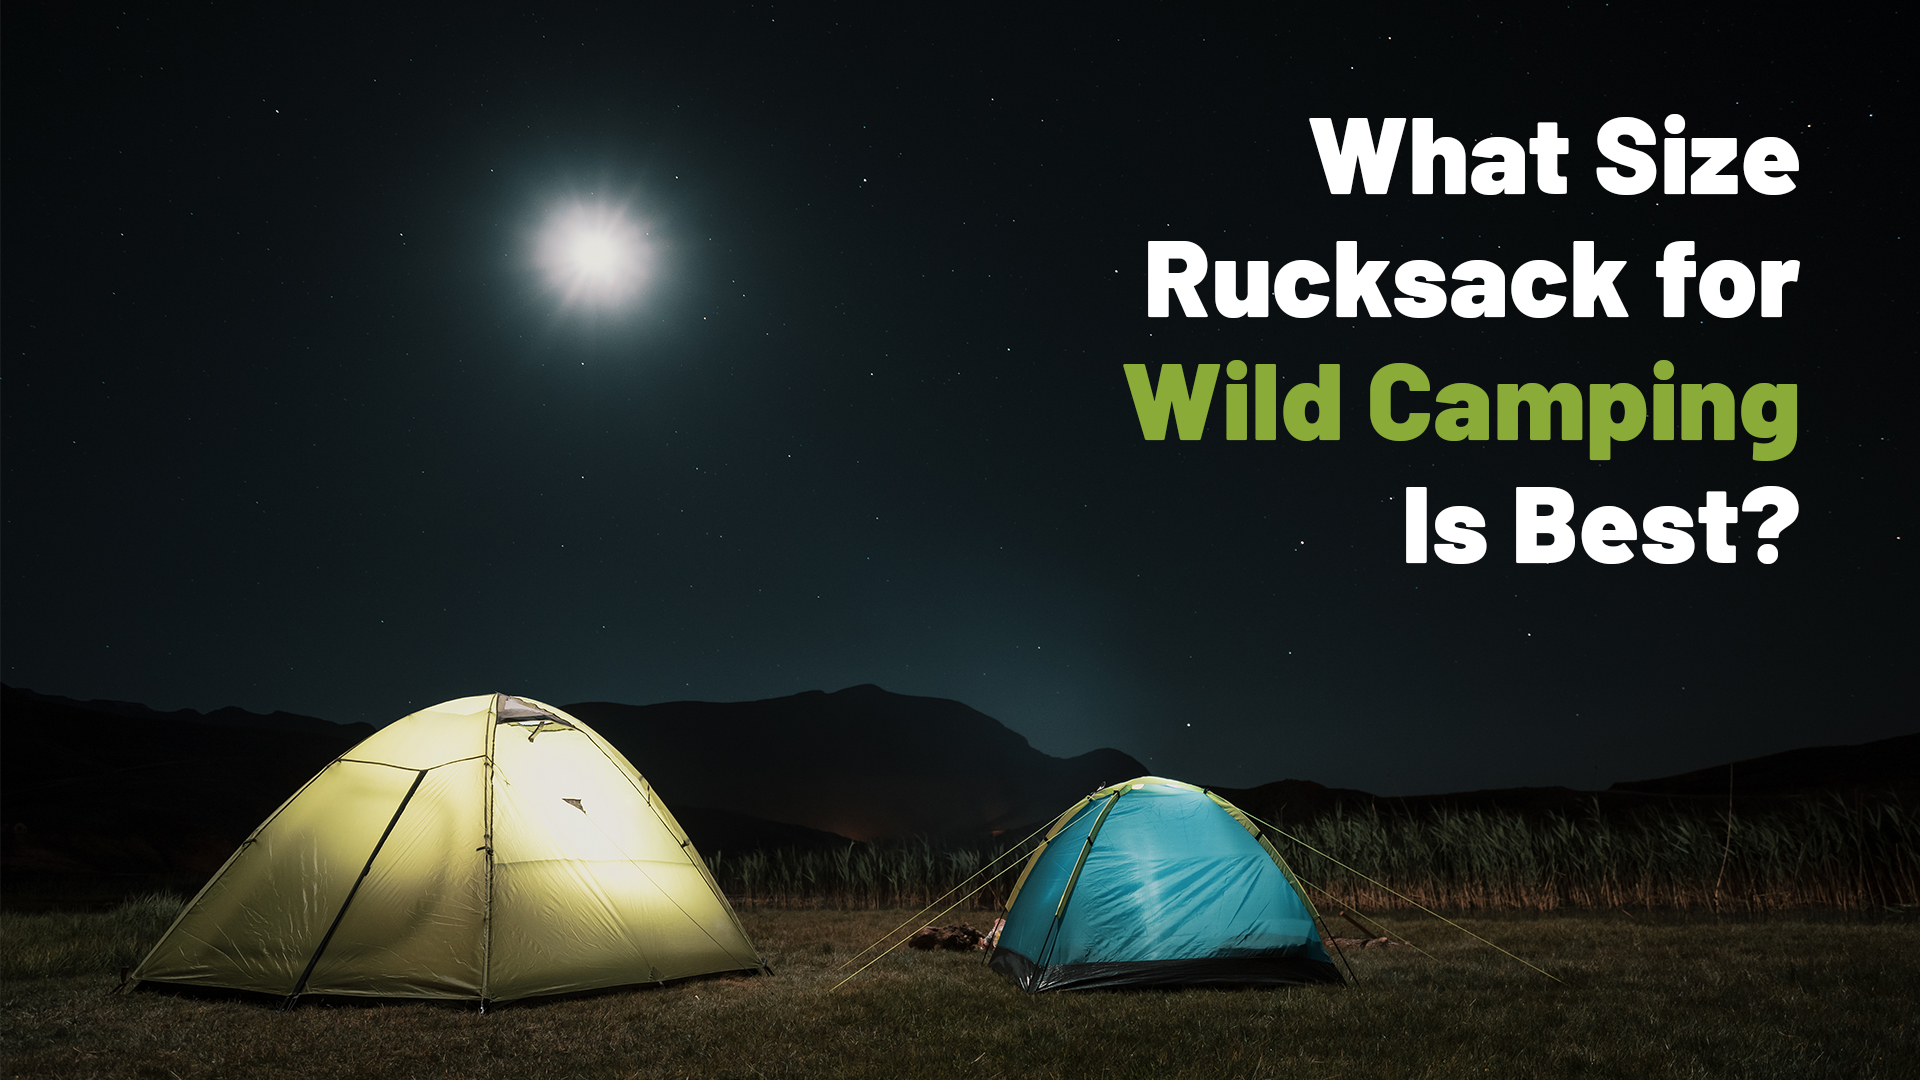 What Size Rucksack for Wild Camping Is Best?